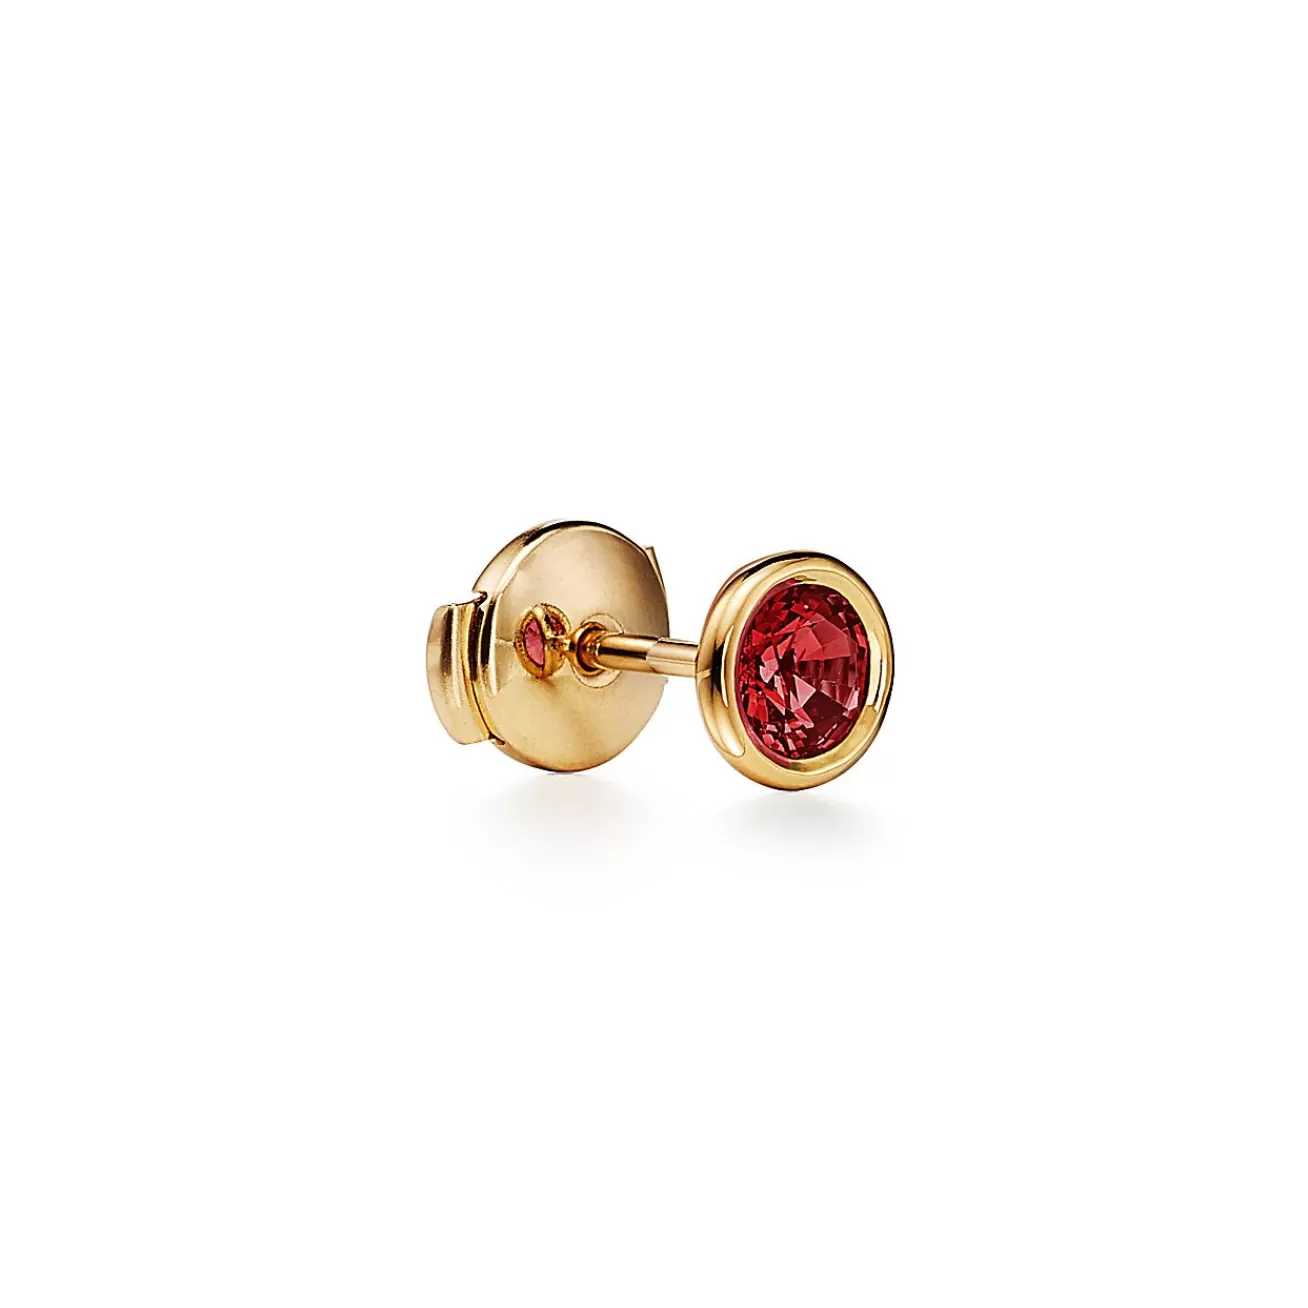 Tiffany & Co. Elsa Peretti® Color by the Yard Earrings in Yellow Gold with Rubies | ^ Earrings | Gold Jewelry